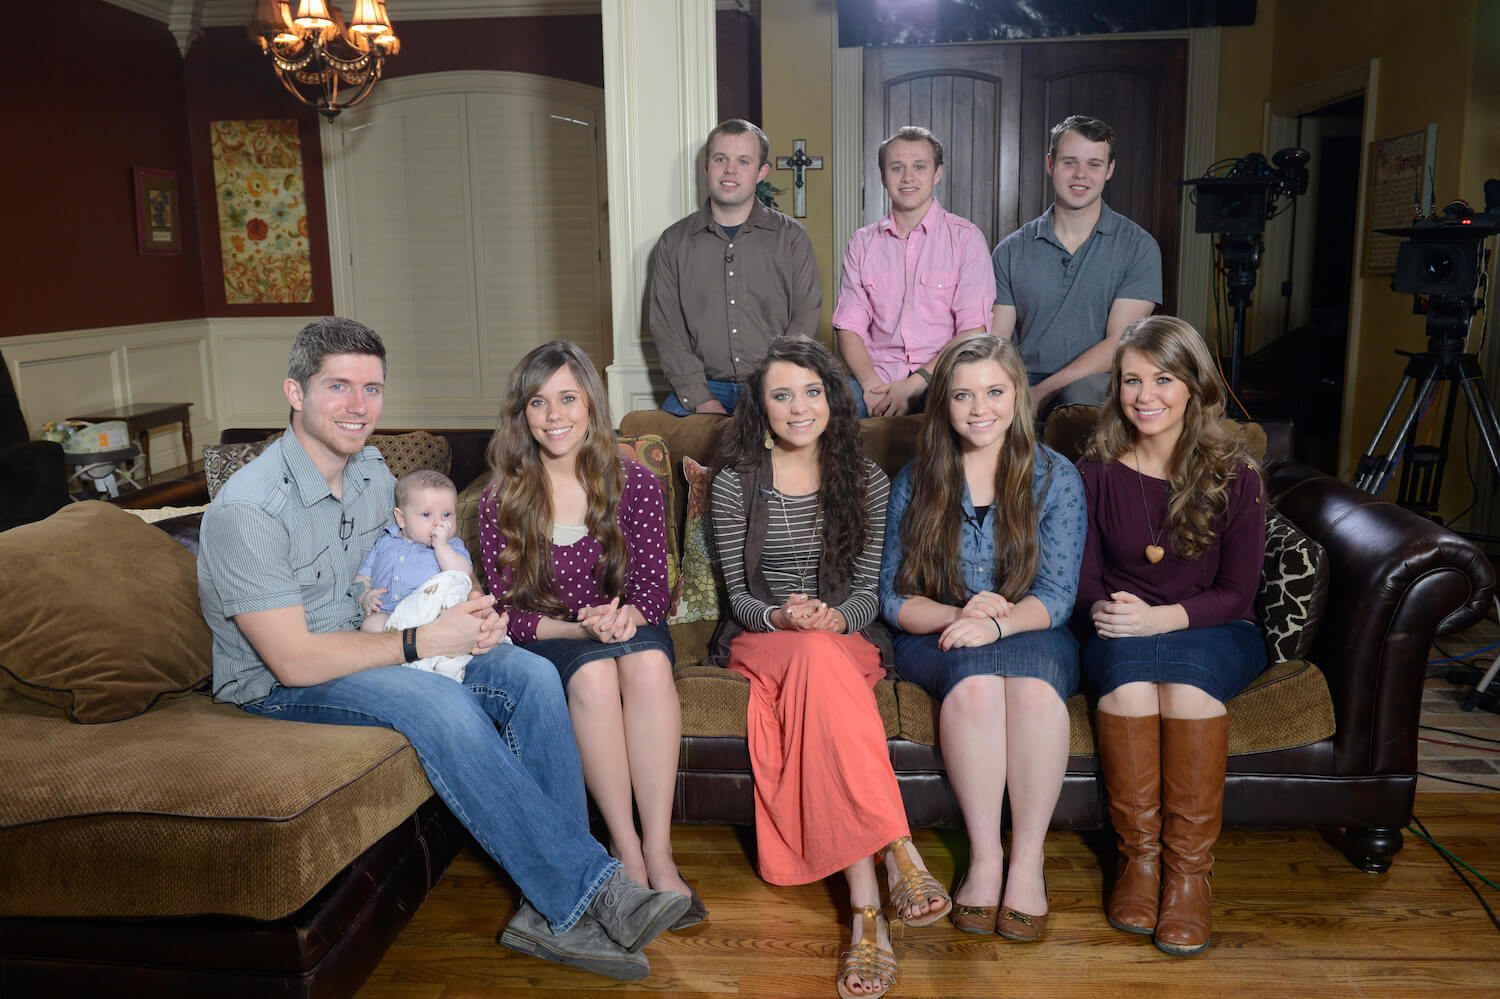 Duggar family members standing sitting to pose for a photo